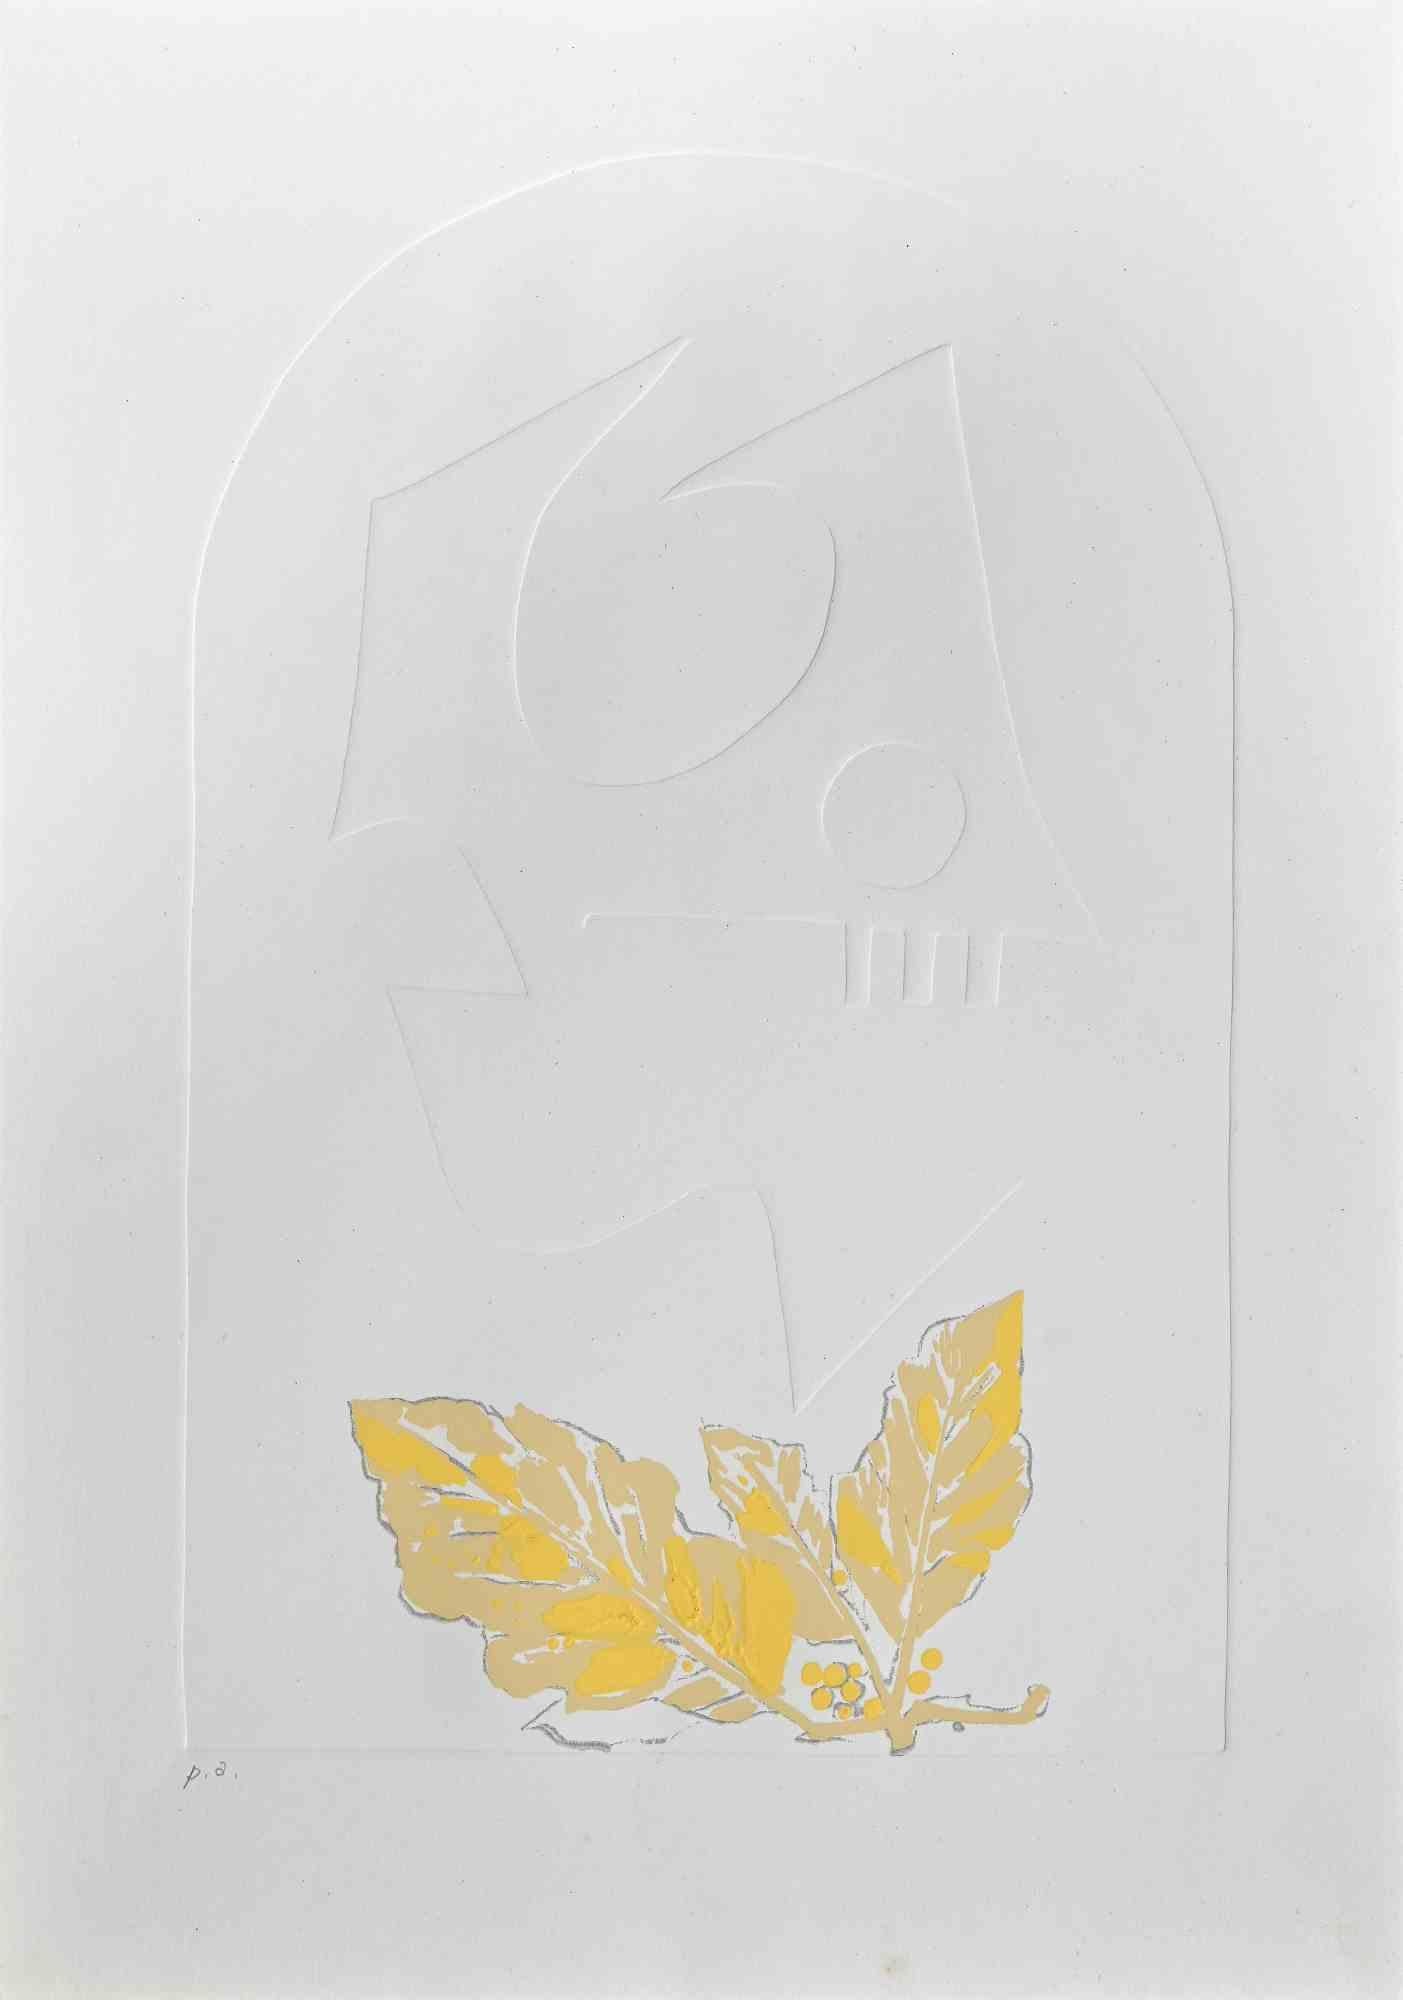 Yellow Leaves is an Screen Print and Embossing realized by Leo Guida in 1971s.

Good condition, proof artist.

No signature.

Artist sensitive to current issues, artistic movements and historical techniques, Leo Guida has been able to weave a